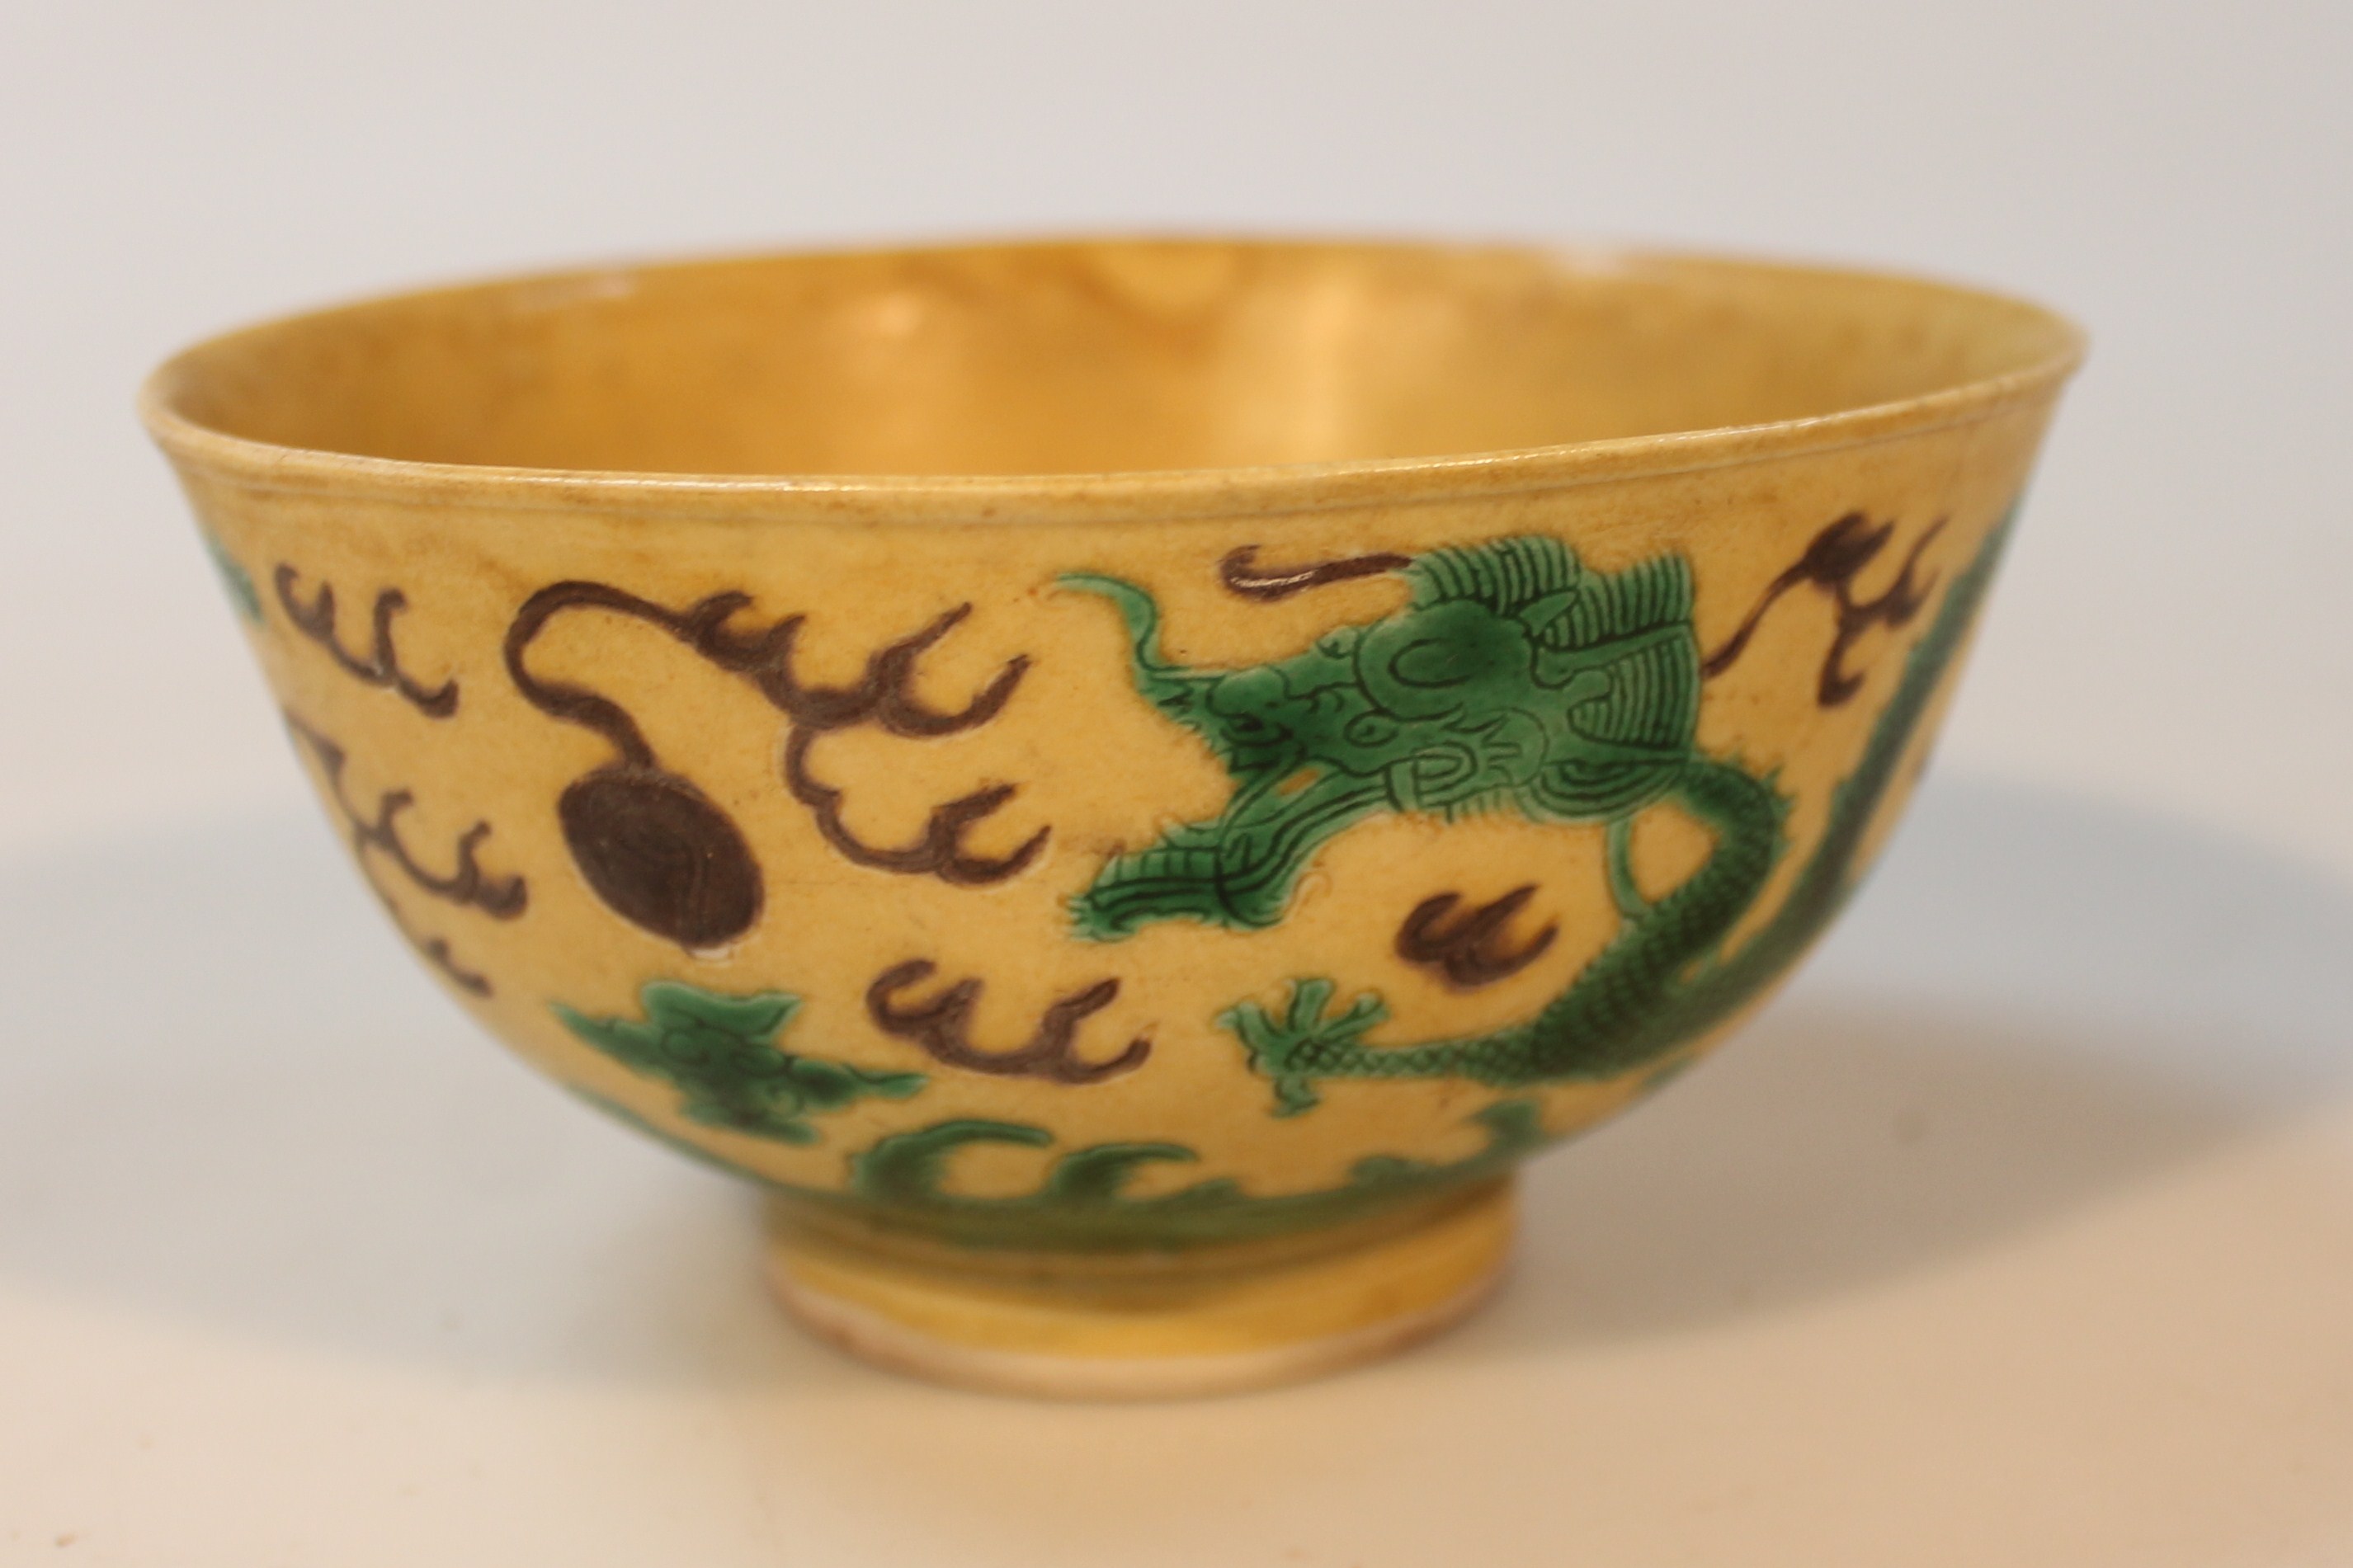 A Chinese porcelain yellow and green ground bowl, decorated with dragons and foliage on a circular